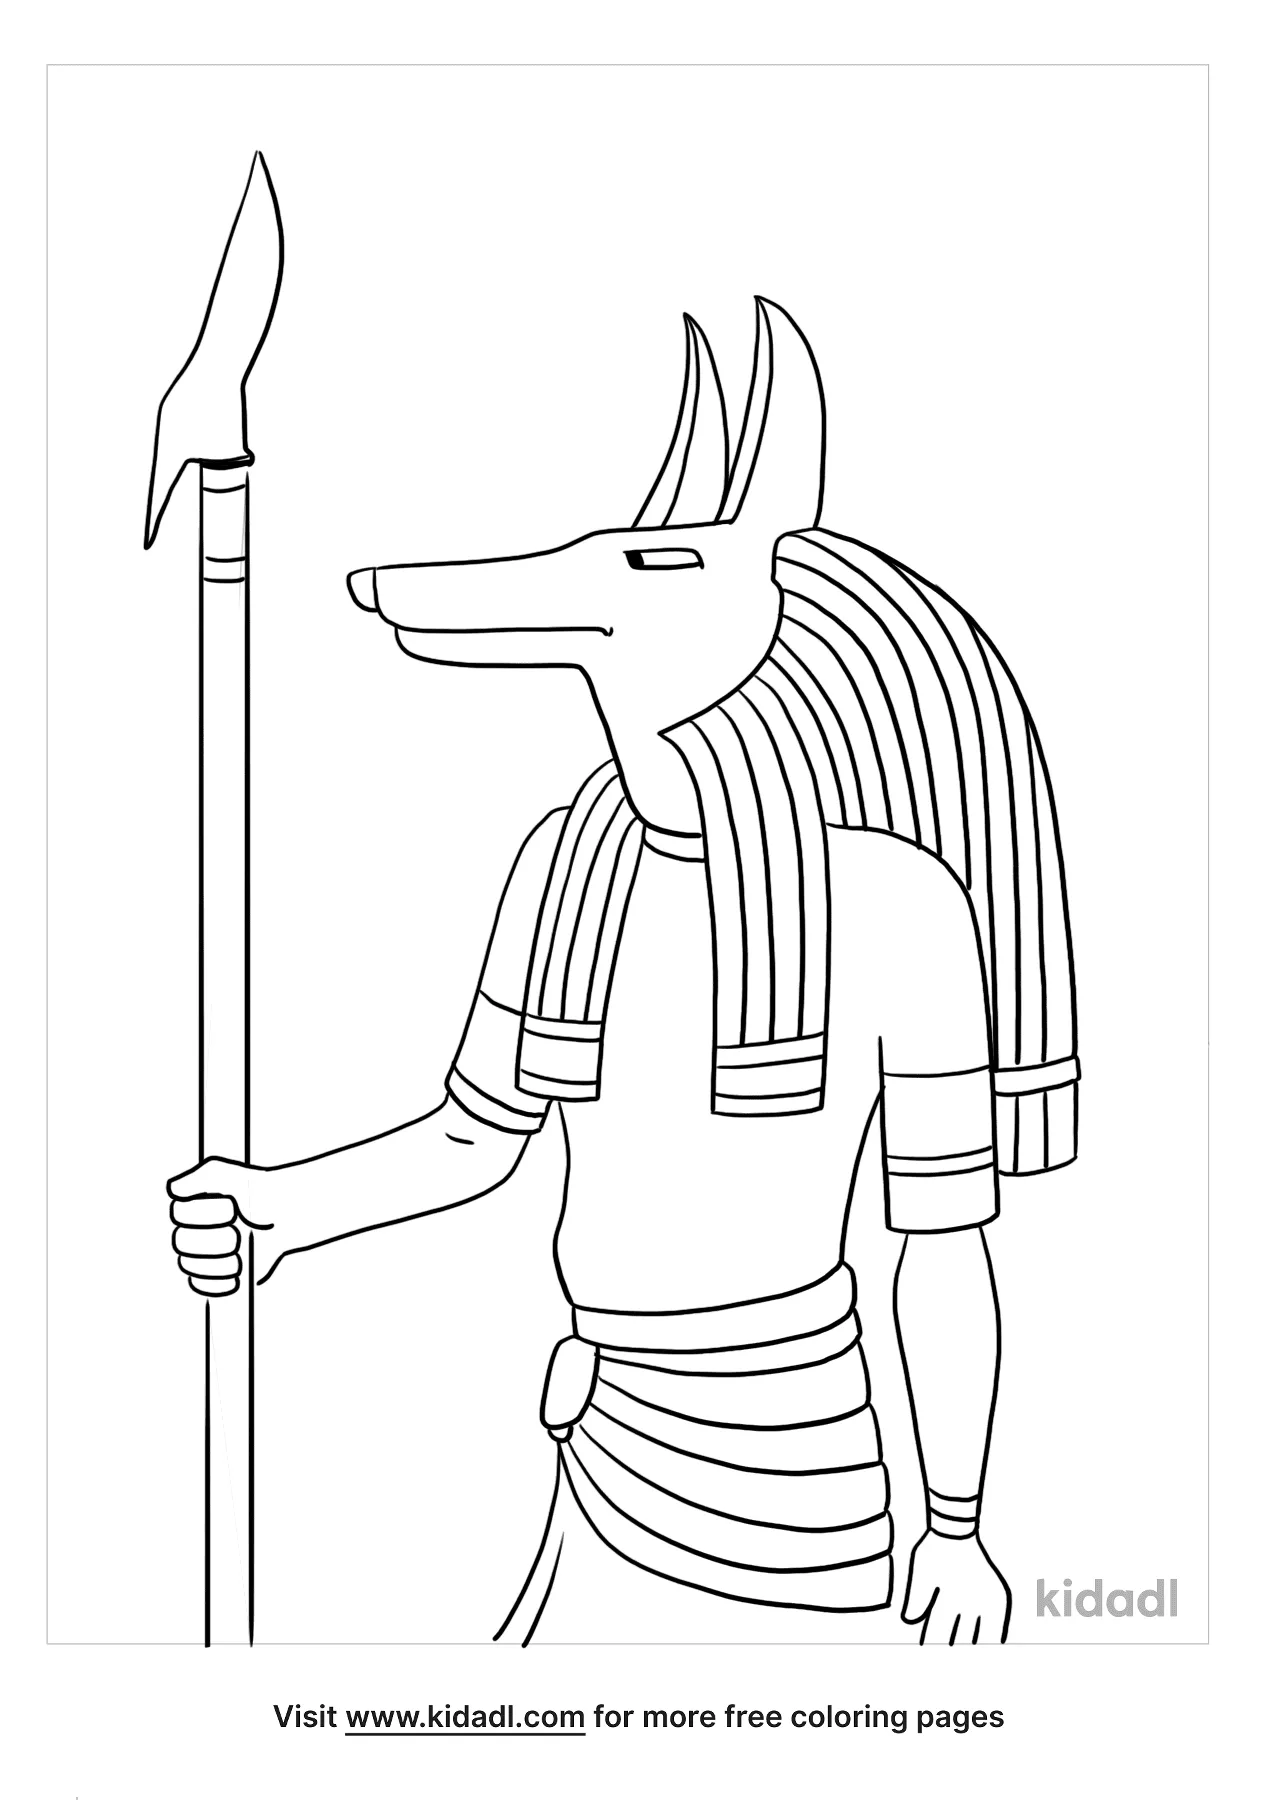 Ancient Egypt Coloring Pages   Free History Coloring Pages   Kidadl